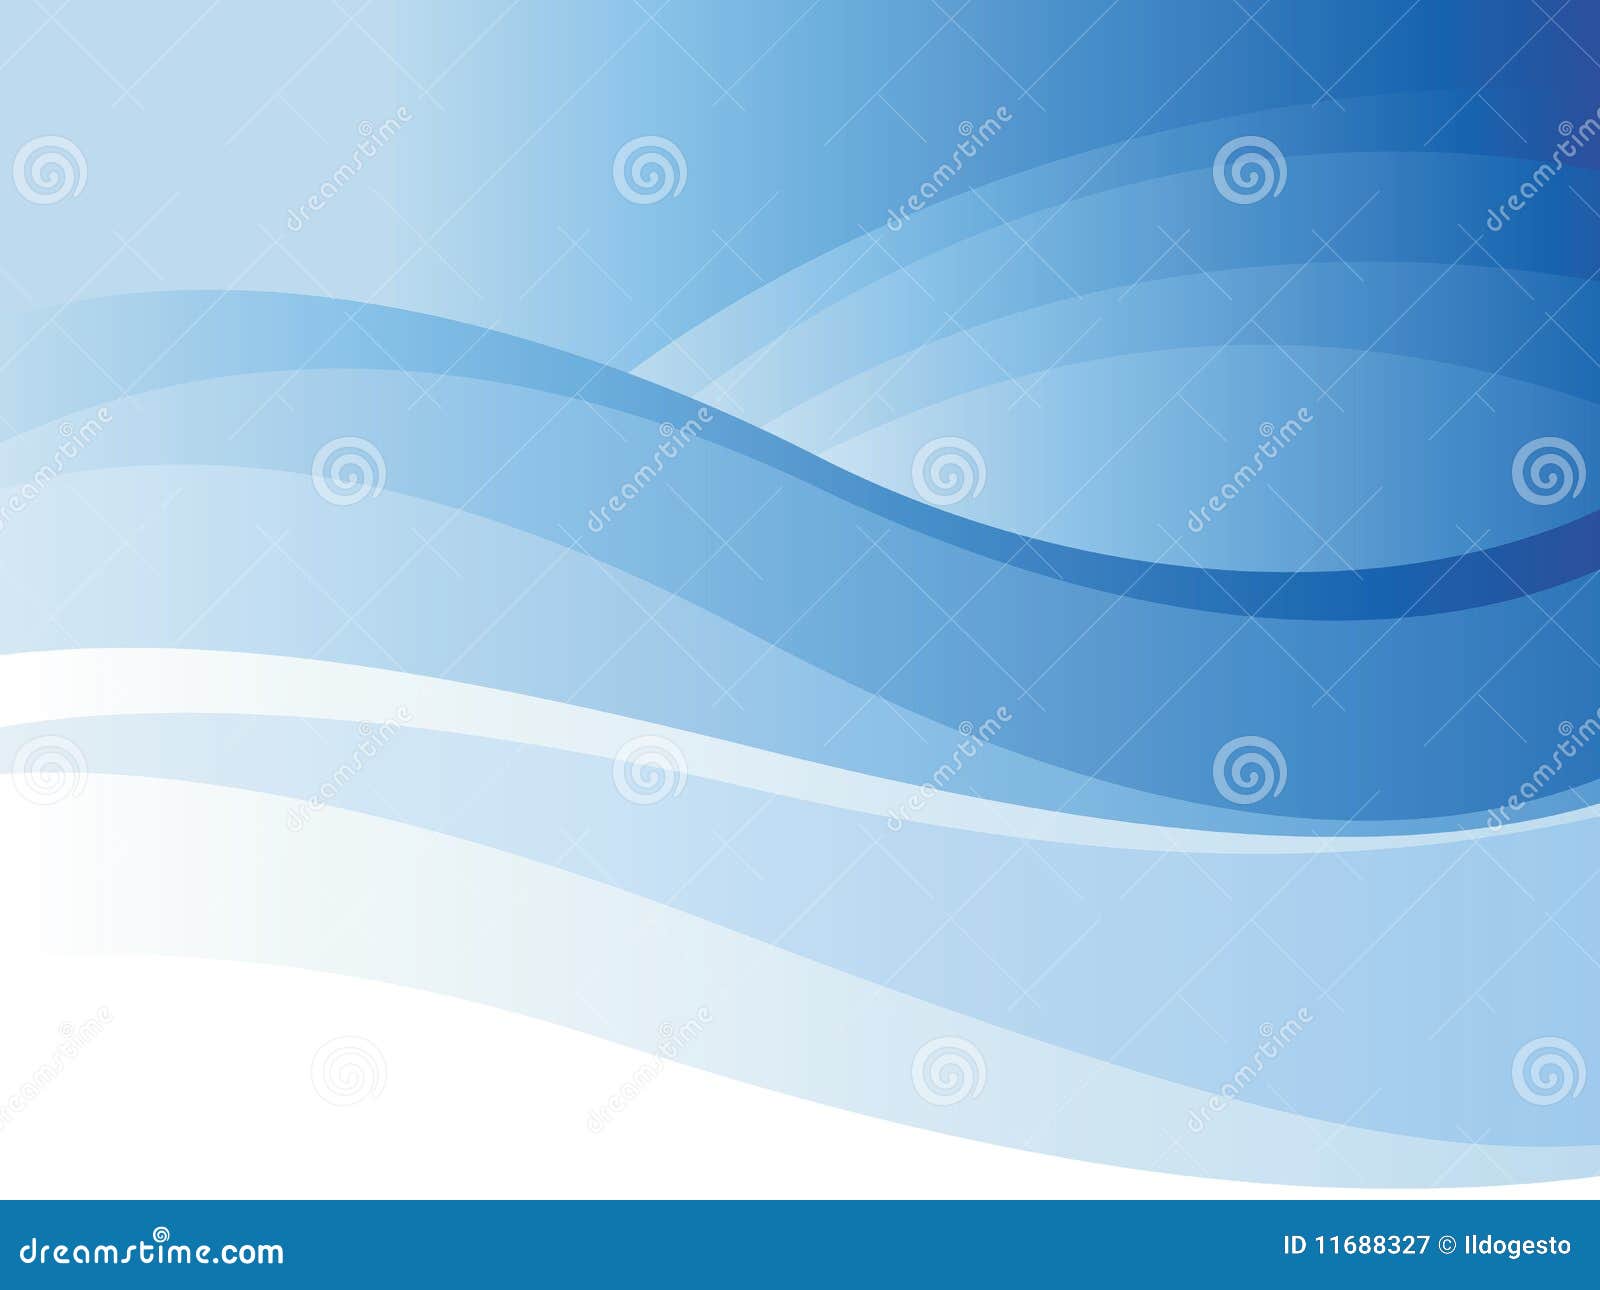 Background of blue wave stock vector. Illustration of curl - 11688327